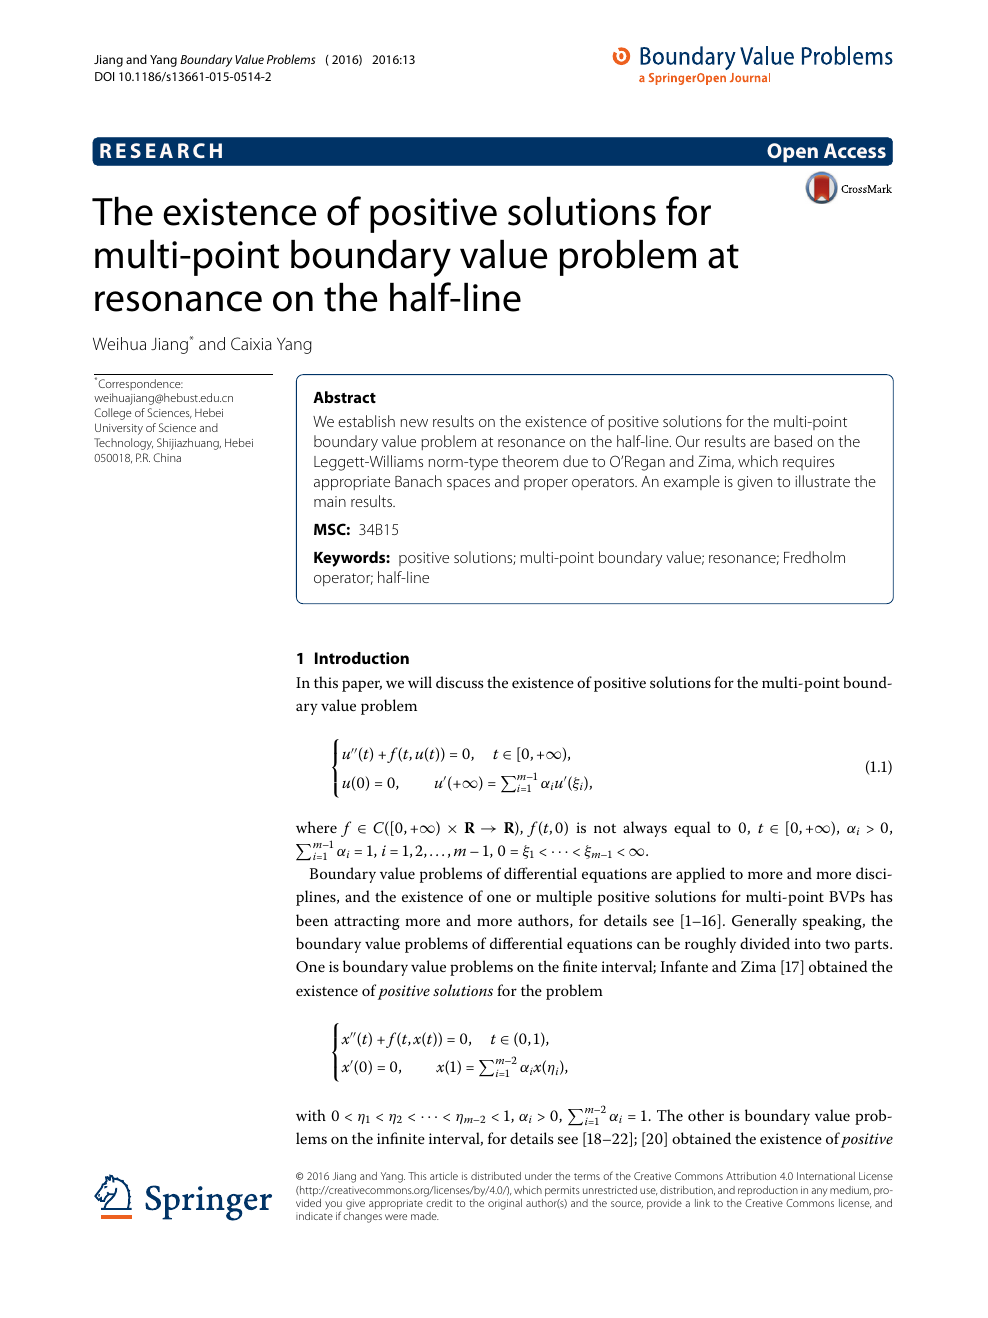 The Existence Of Positive Solutions For Multi Point Boundary Value Problem At Resonance On The Half Line Topic Of Research Paper In Mathematics Download Scholarly Article Pdf And Read For Free On Cyberleninka